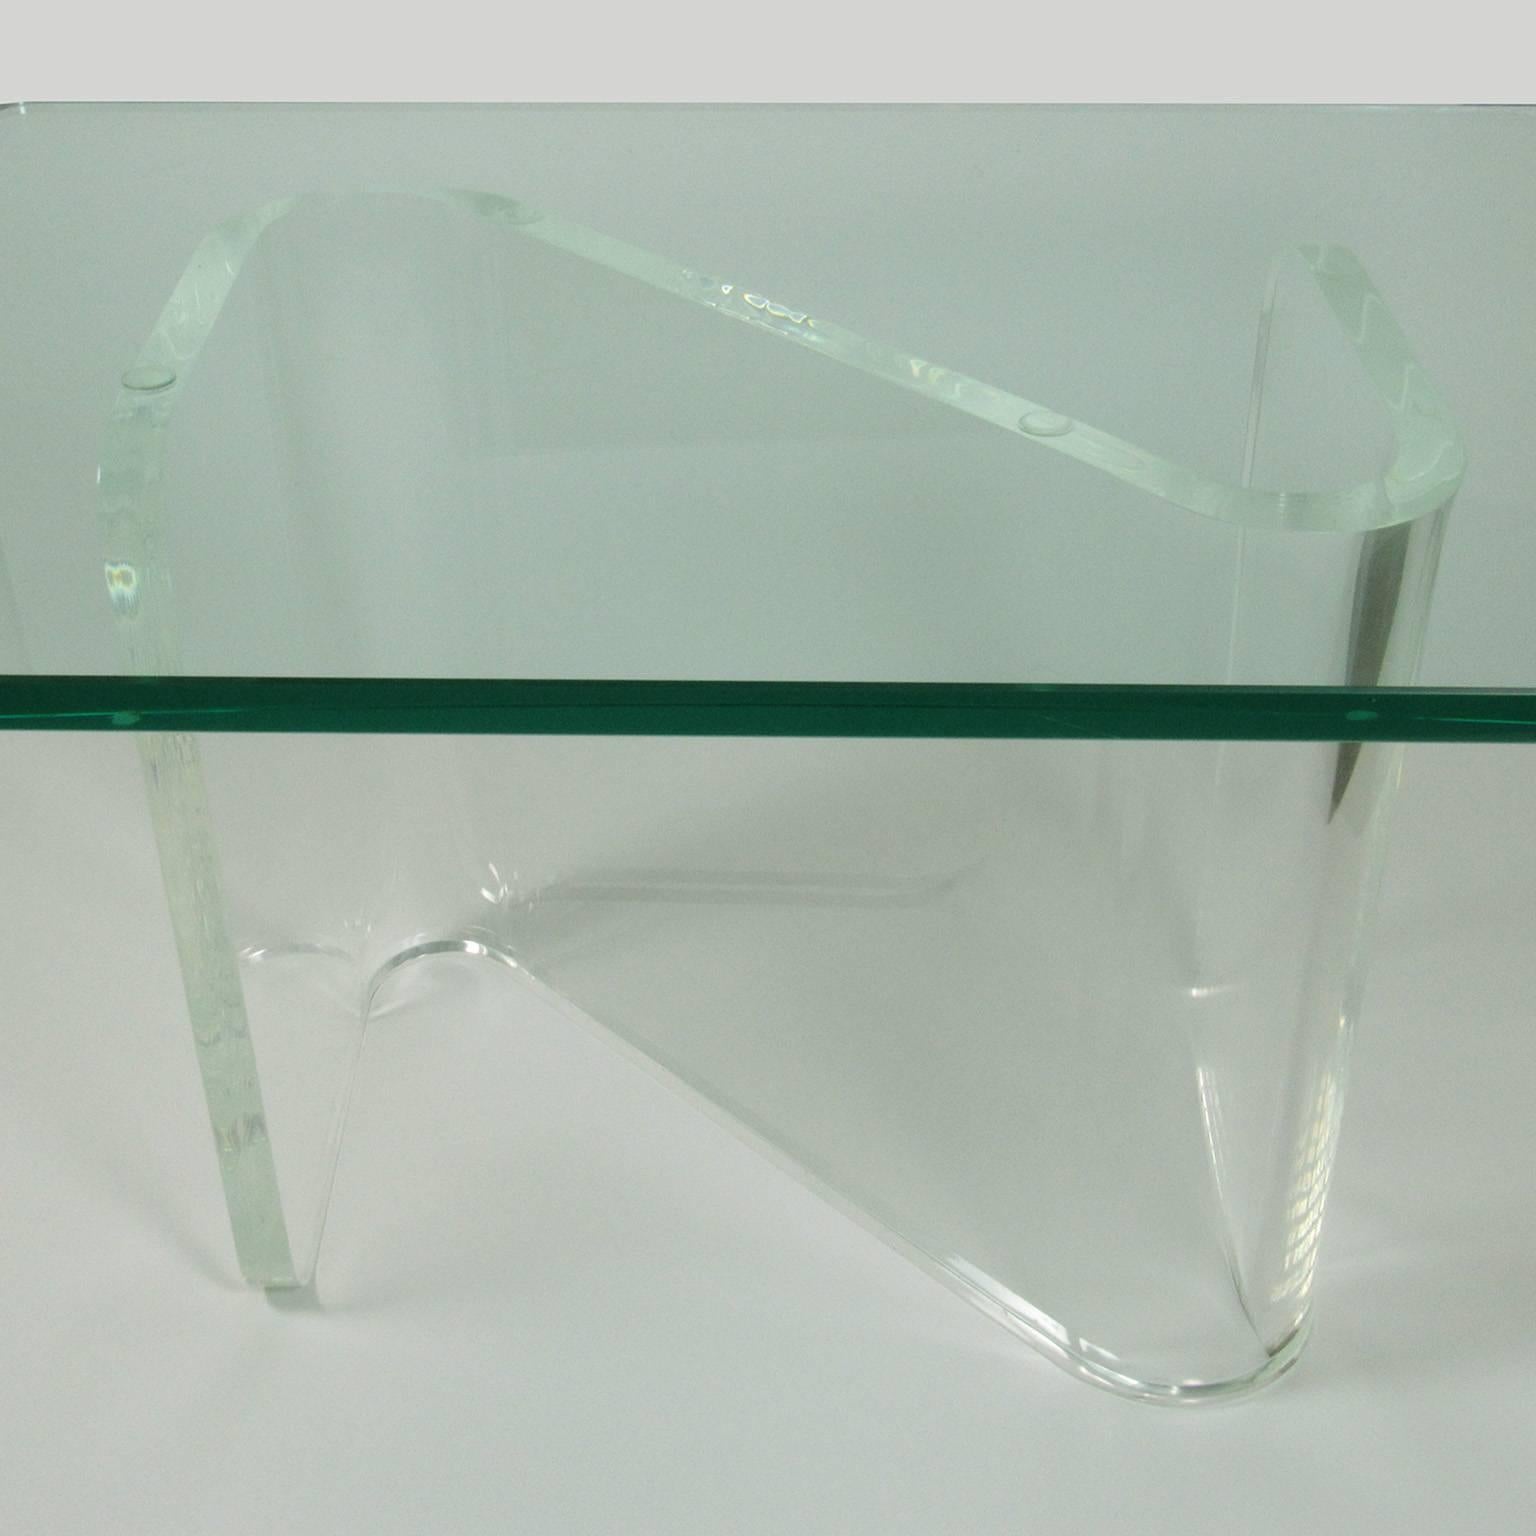 Mid-Century Modern Lucite and glass coffee table, with z-form Lucite base and rectangular glass top with rounded corners. Measures: Height: 16 3/4 inches, Top: 30 x 21 x 3/4 inches.